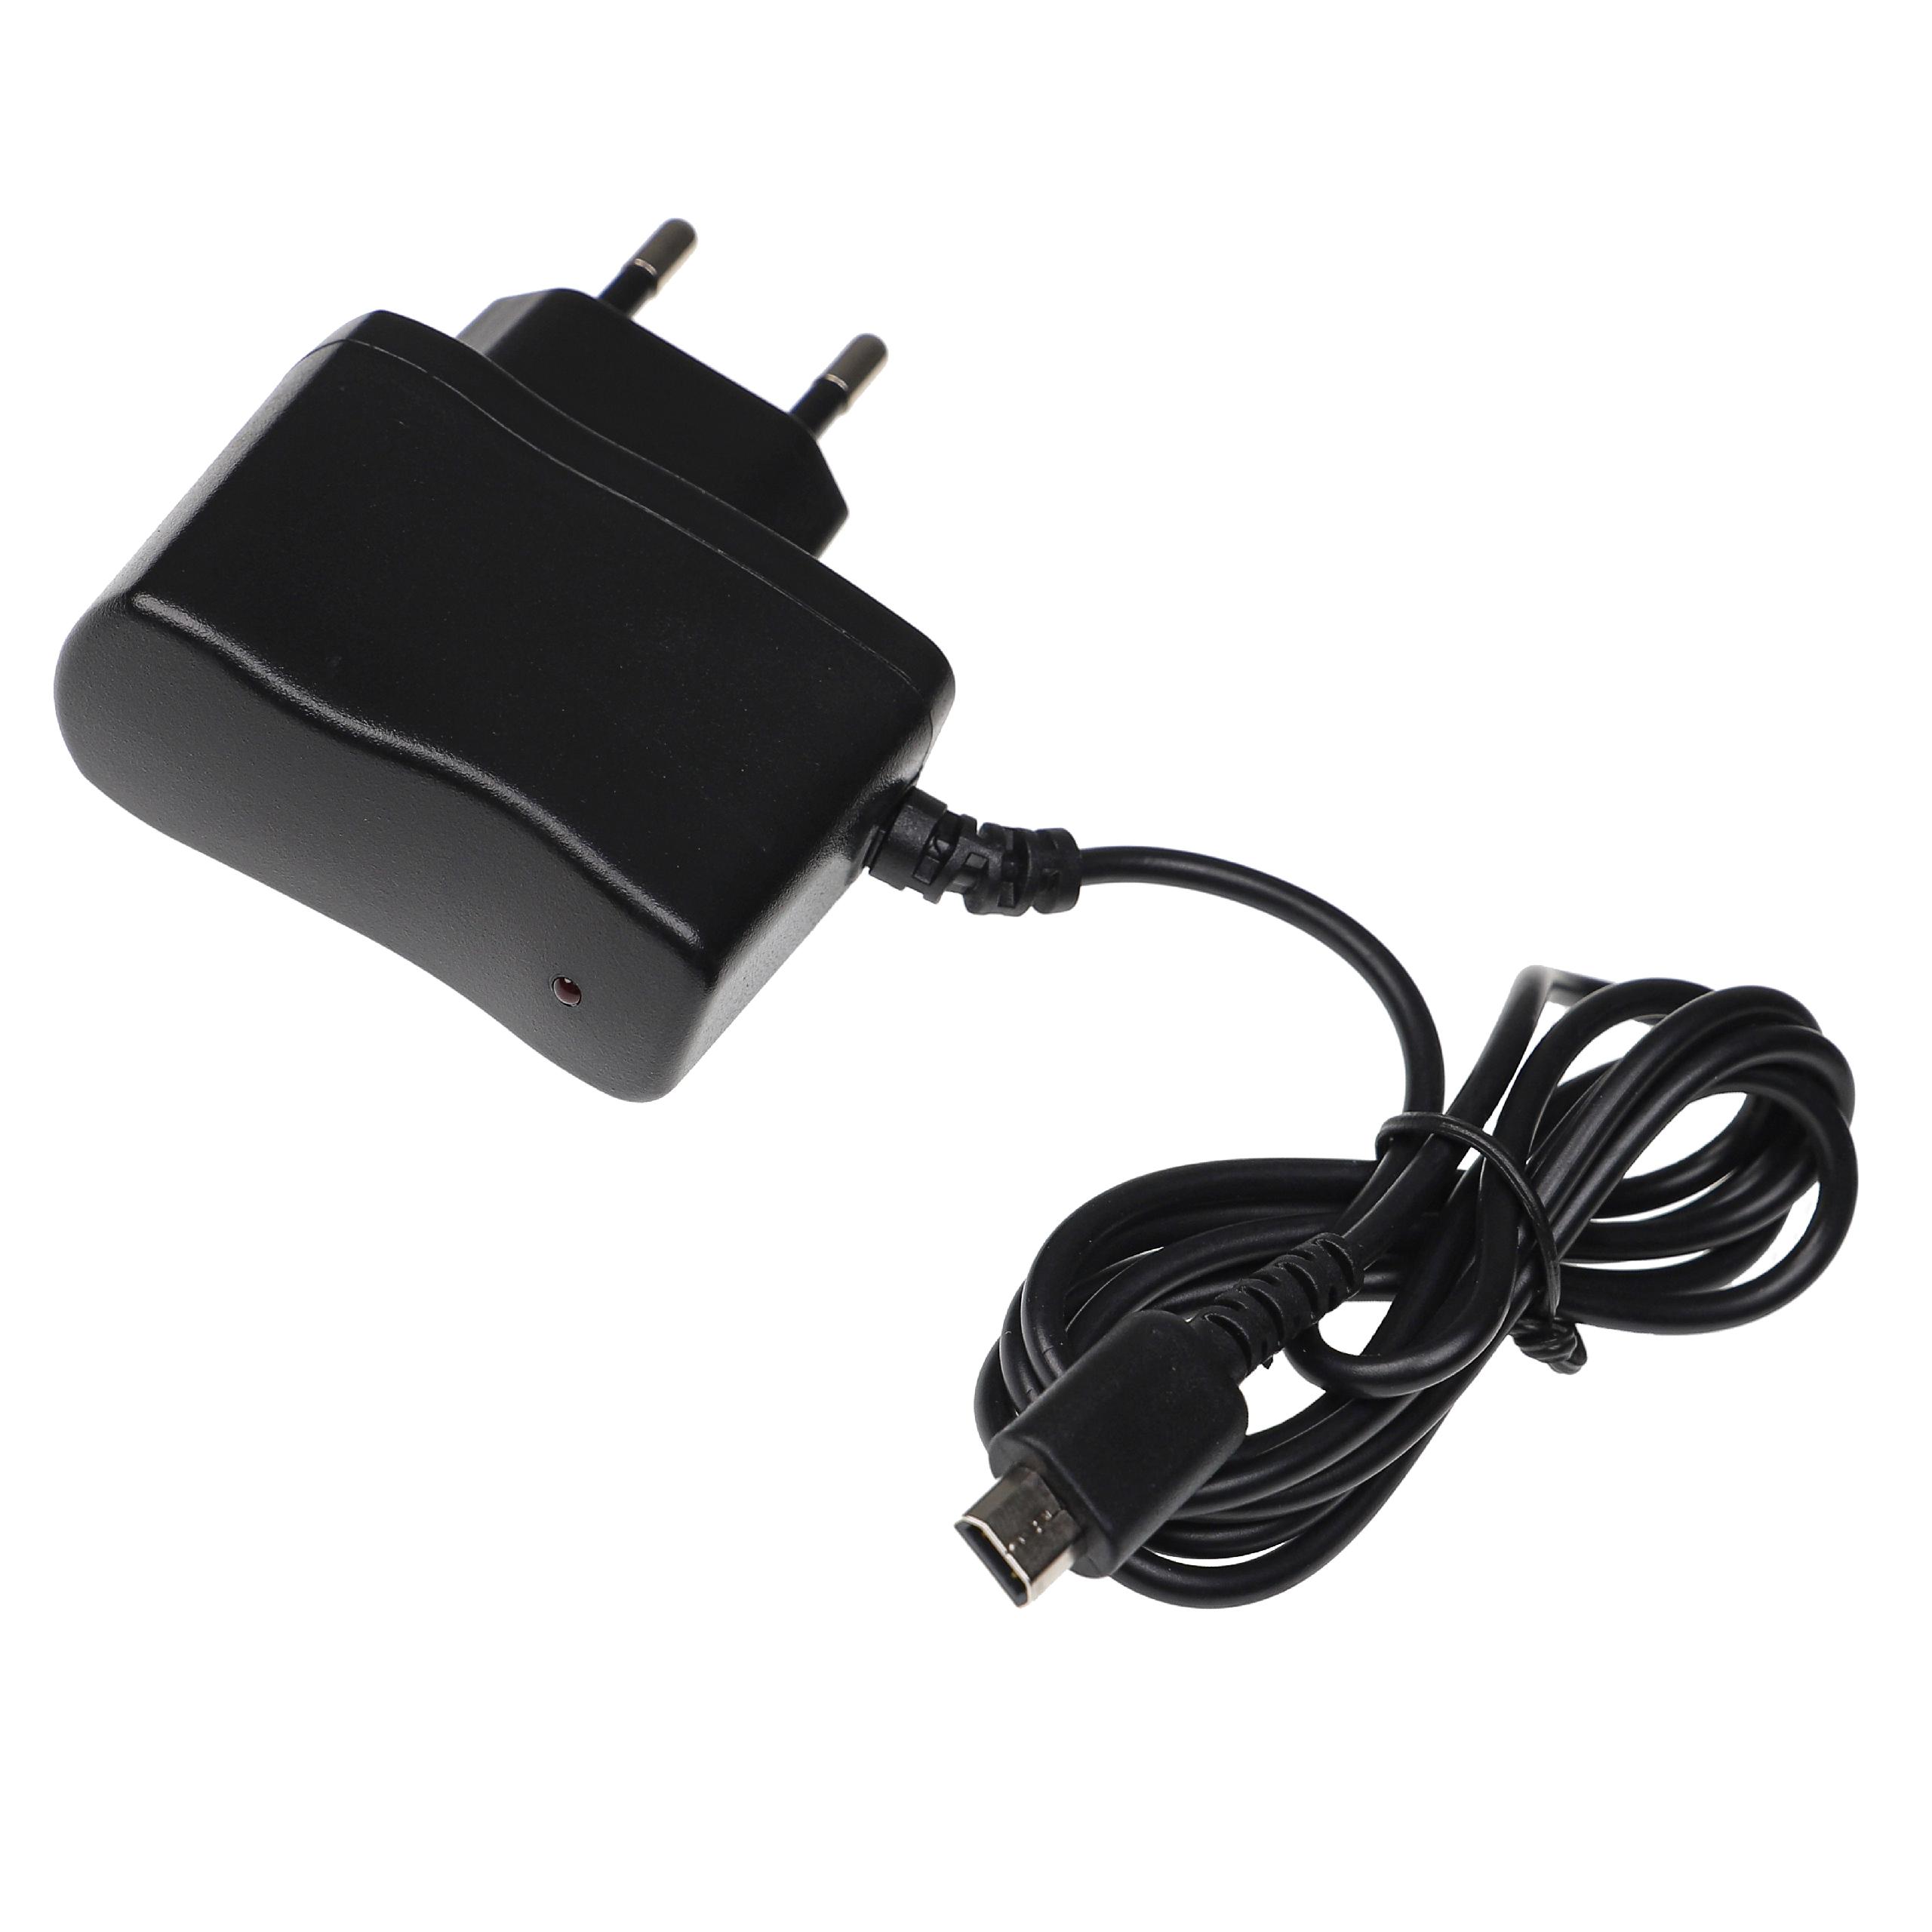 Charger suitable for Nintendo DS Lite Game Console